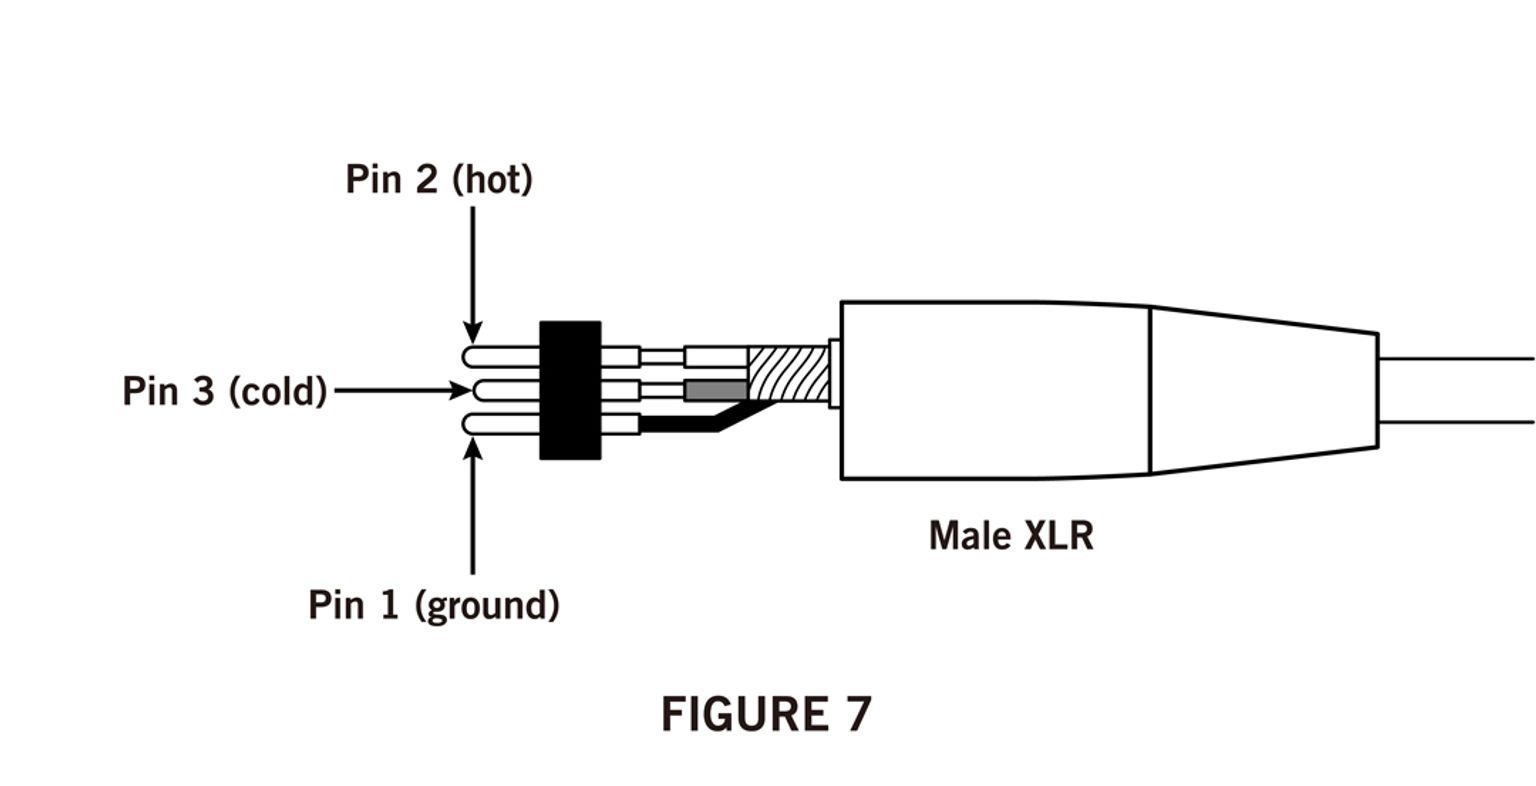 Illustration Figure 7 showing a male XLR connector and its elements